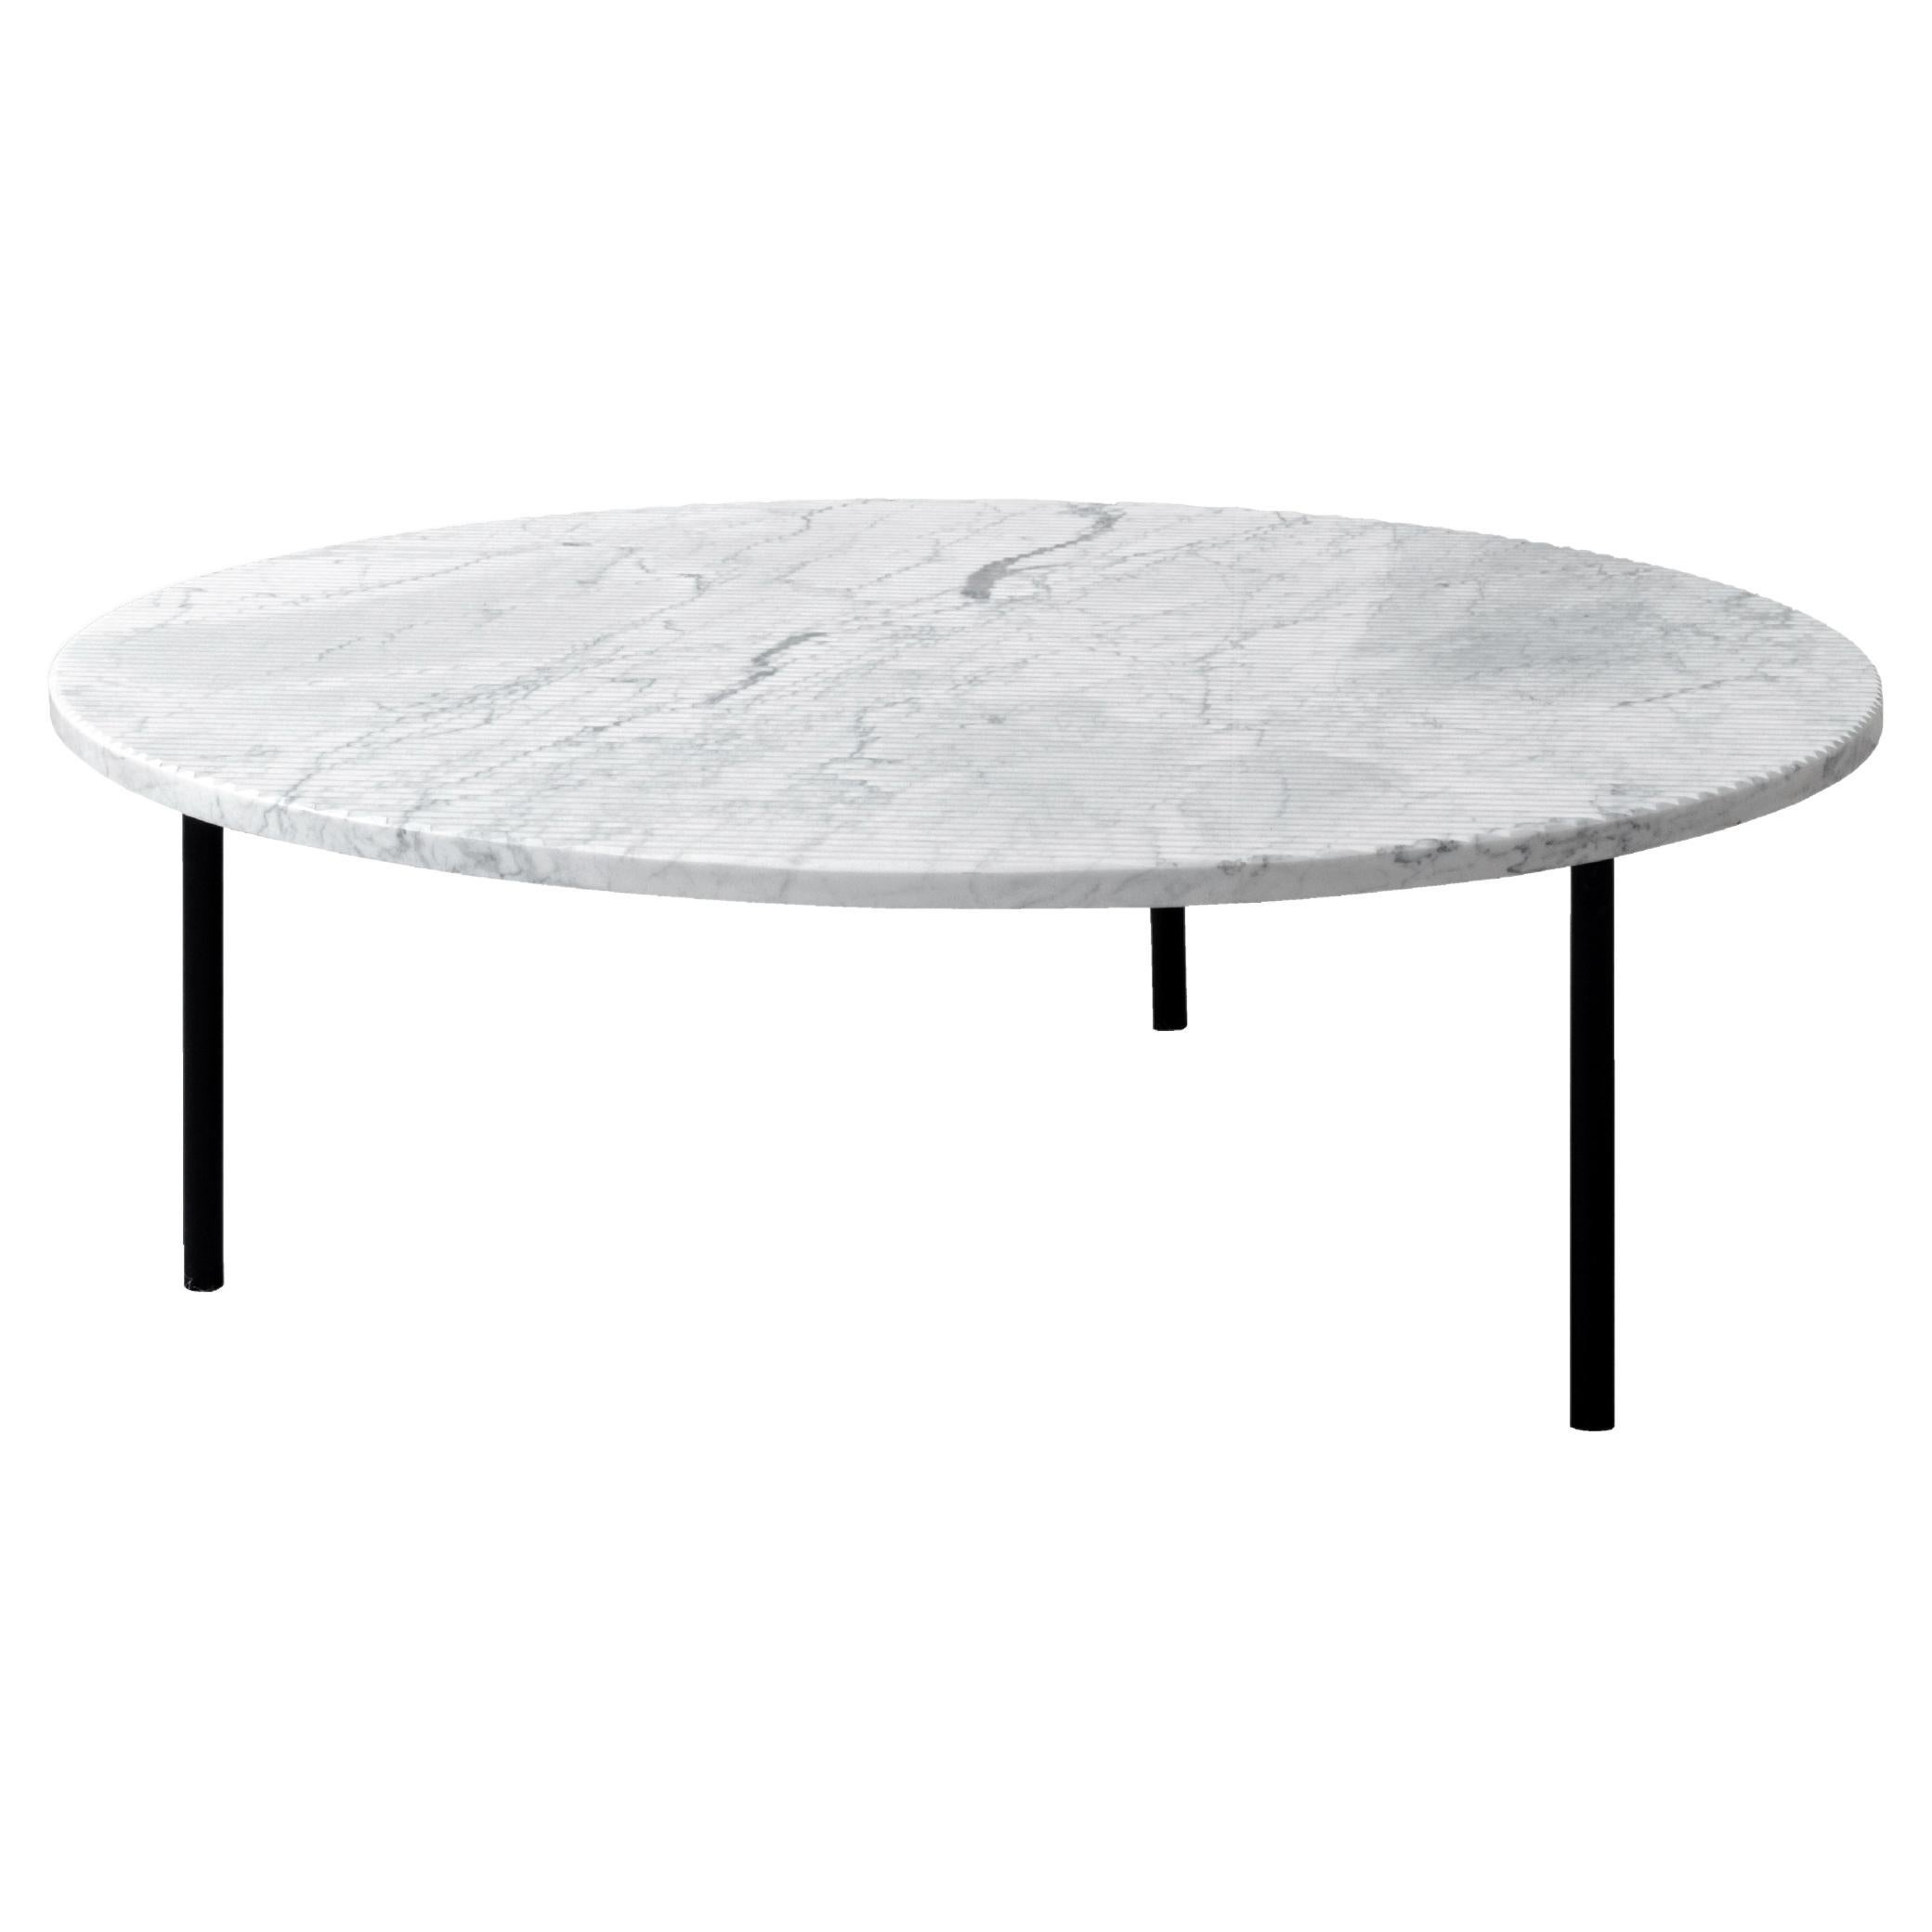 Gruff Grooved Coffe Table Large For Sale